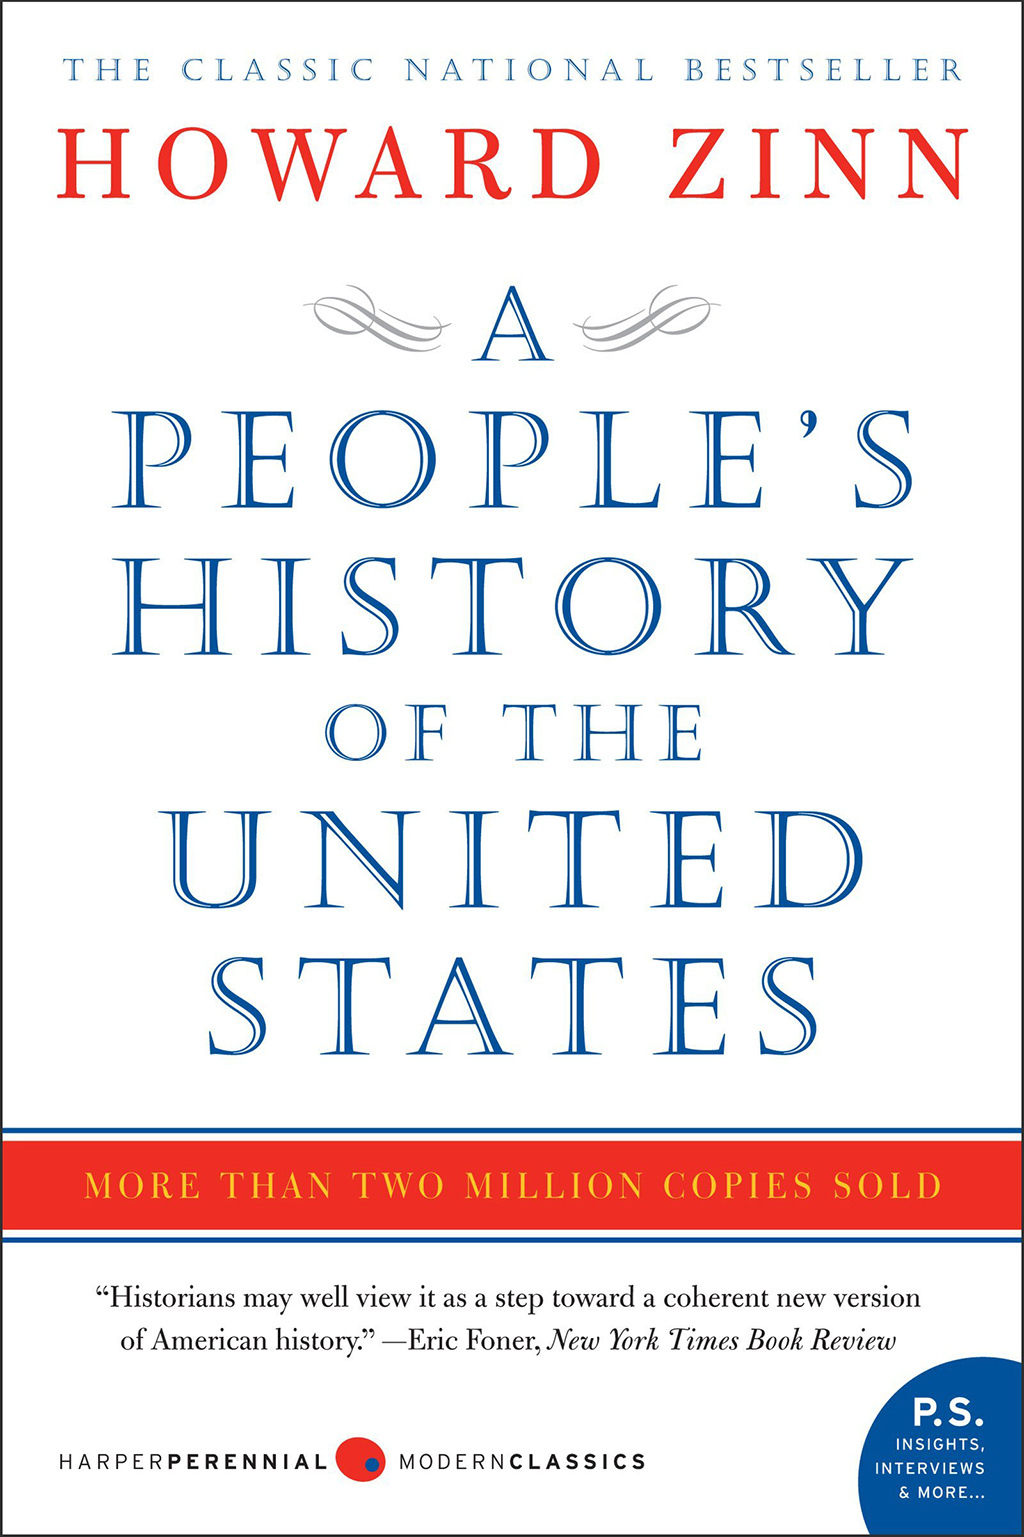 a people's history of the united states, books every man should read